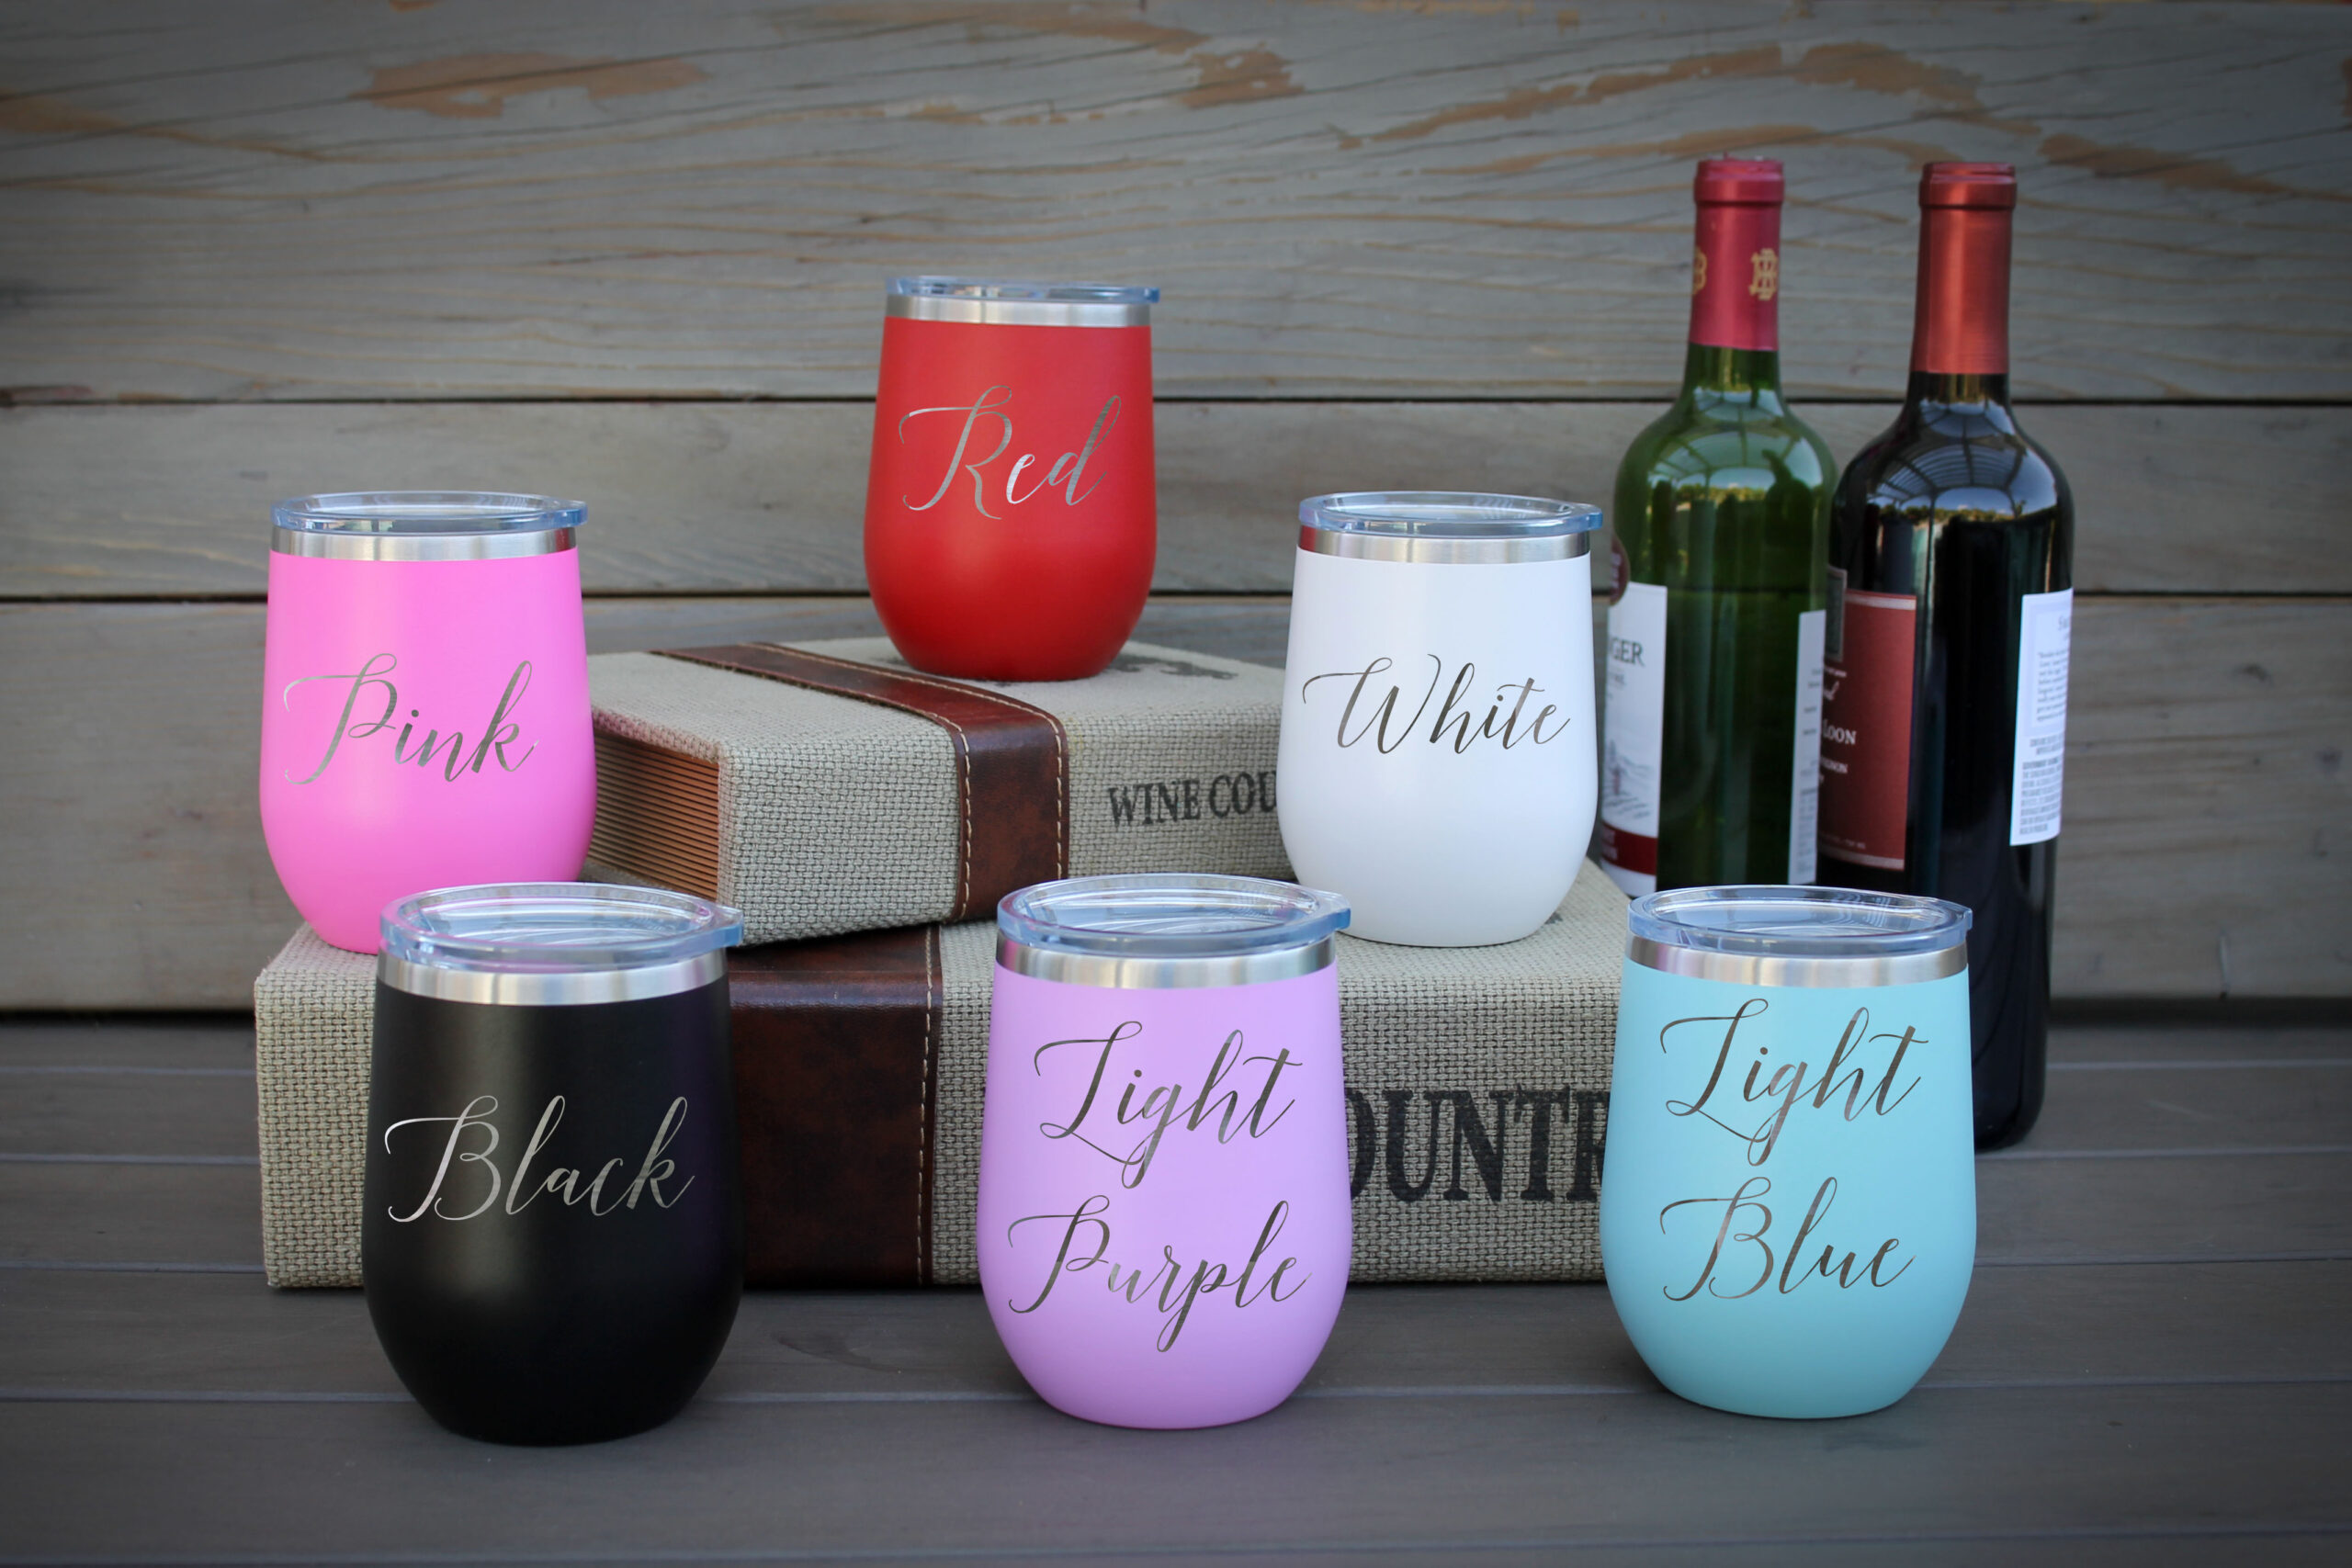 Personalized Wine Tumbler 12oz With Bulk Pricing Great for Custom